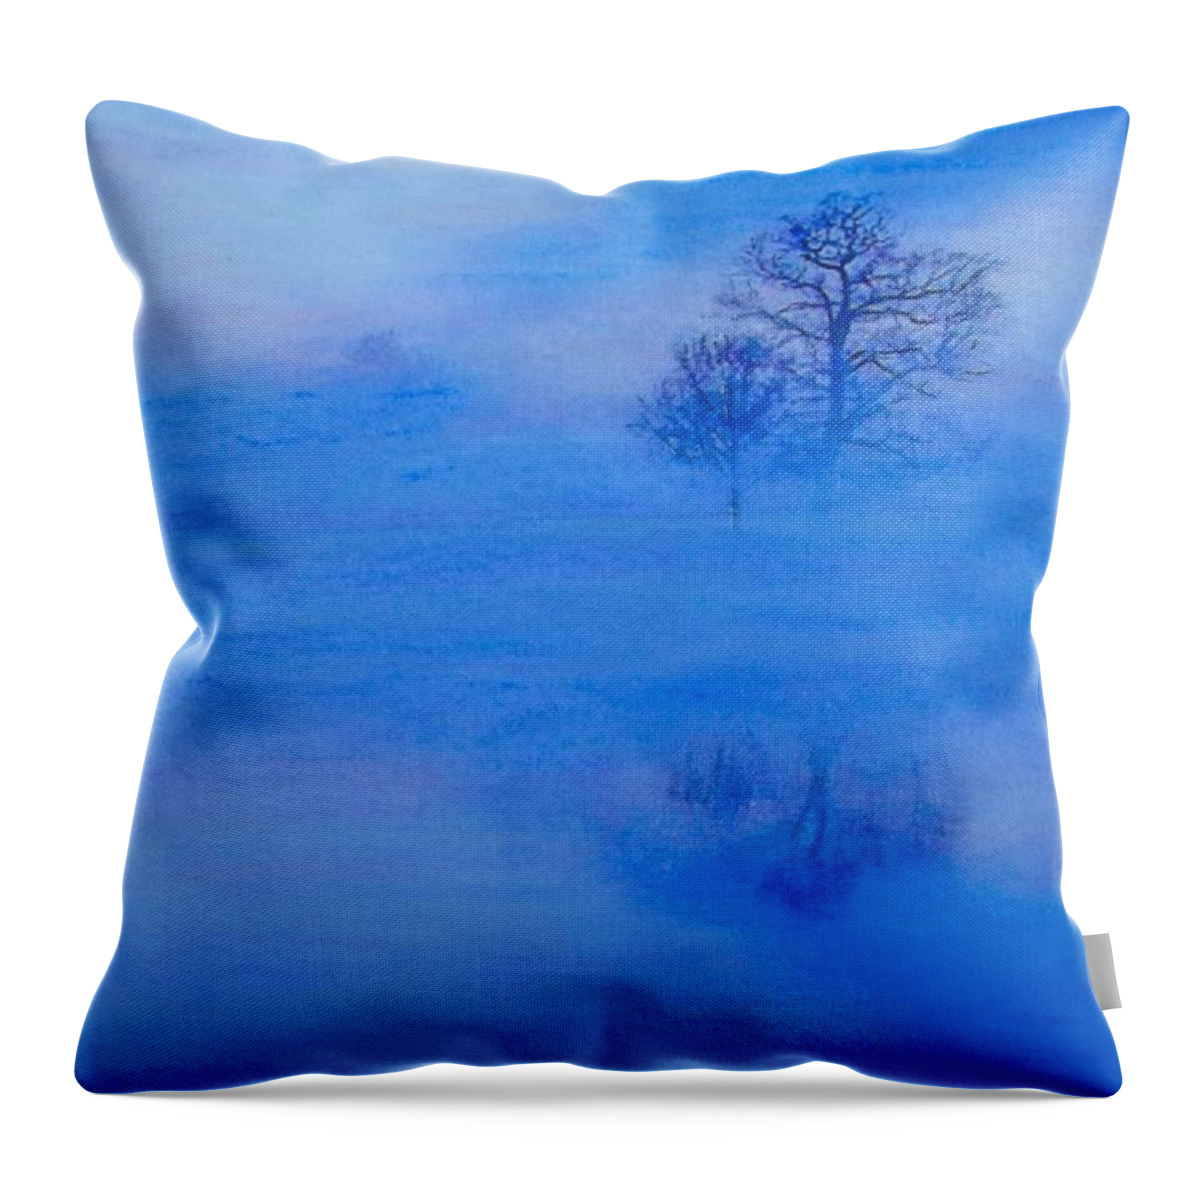 Reflections Throw Pillow featuring the painting Morning Reflections by Cara Frafjord